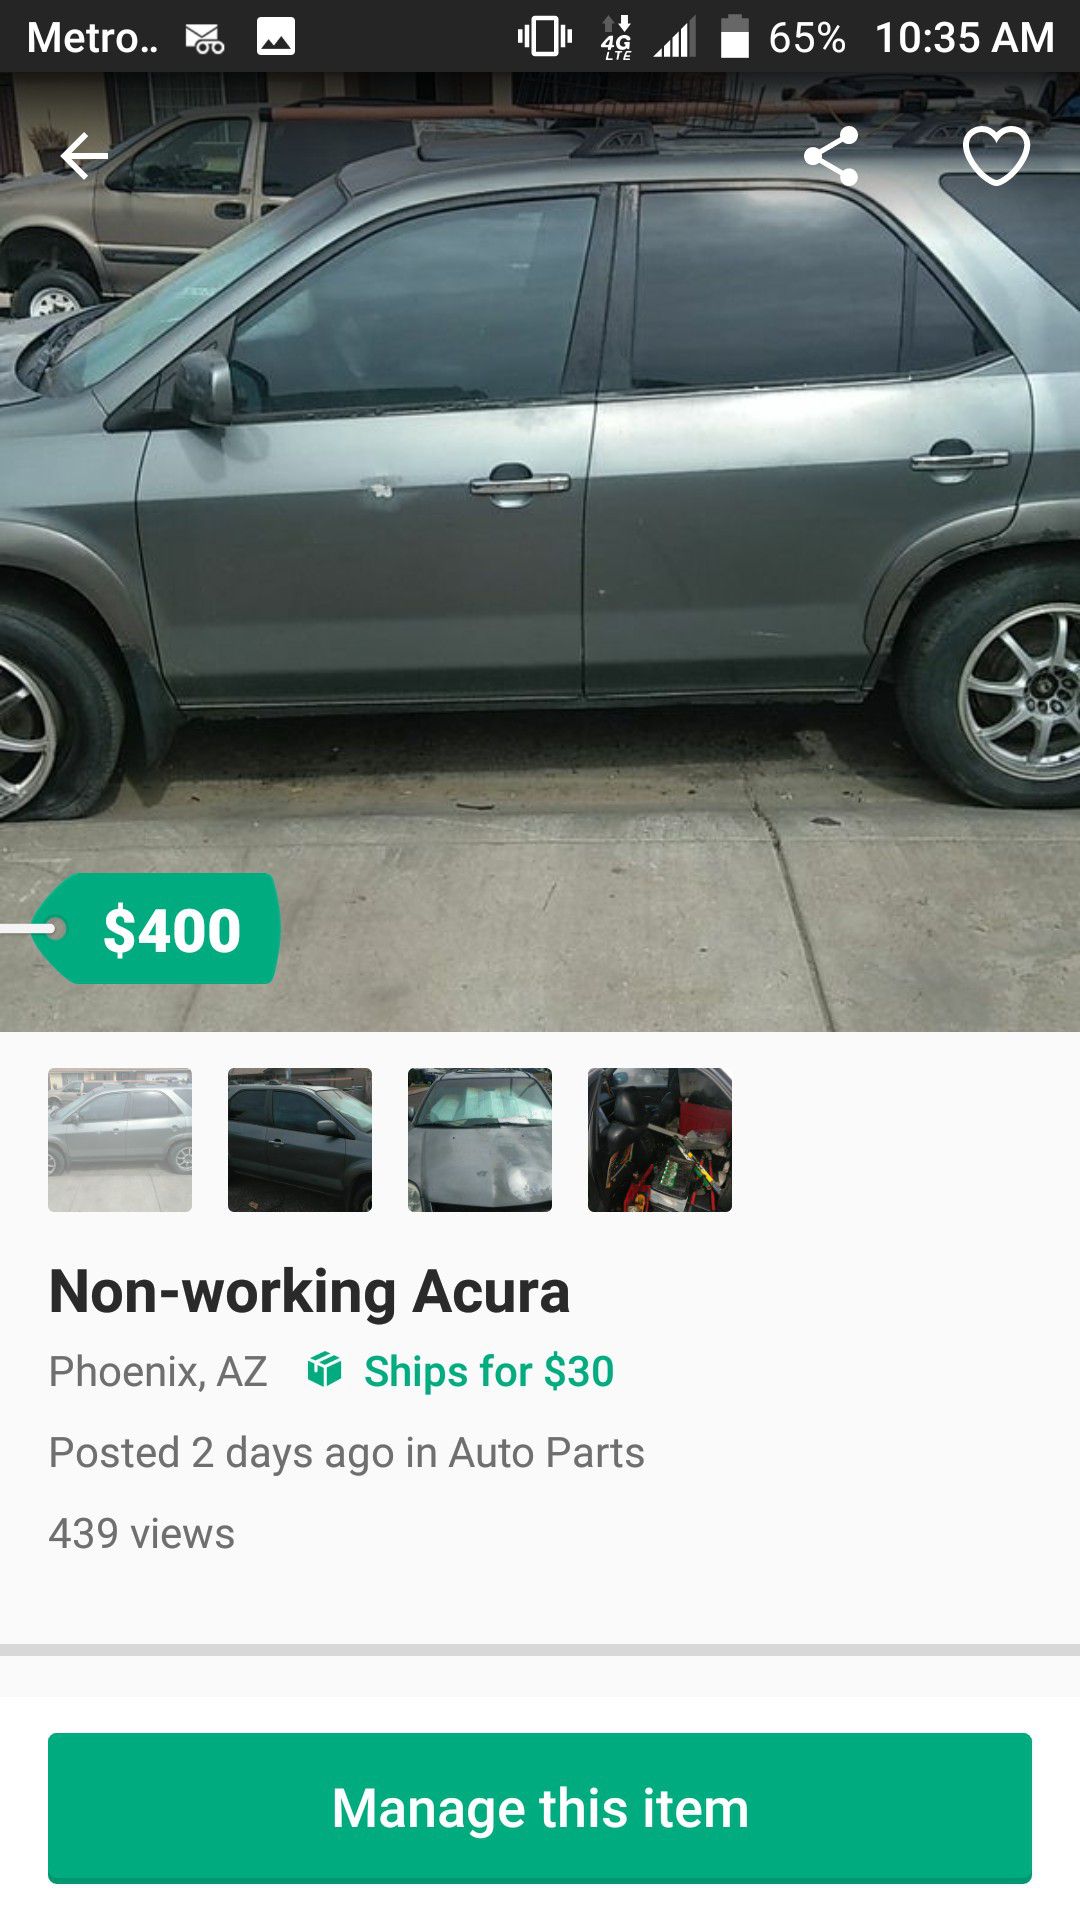 Non-working Acura got potential to run